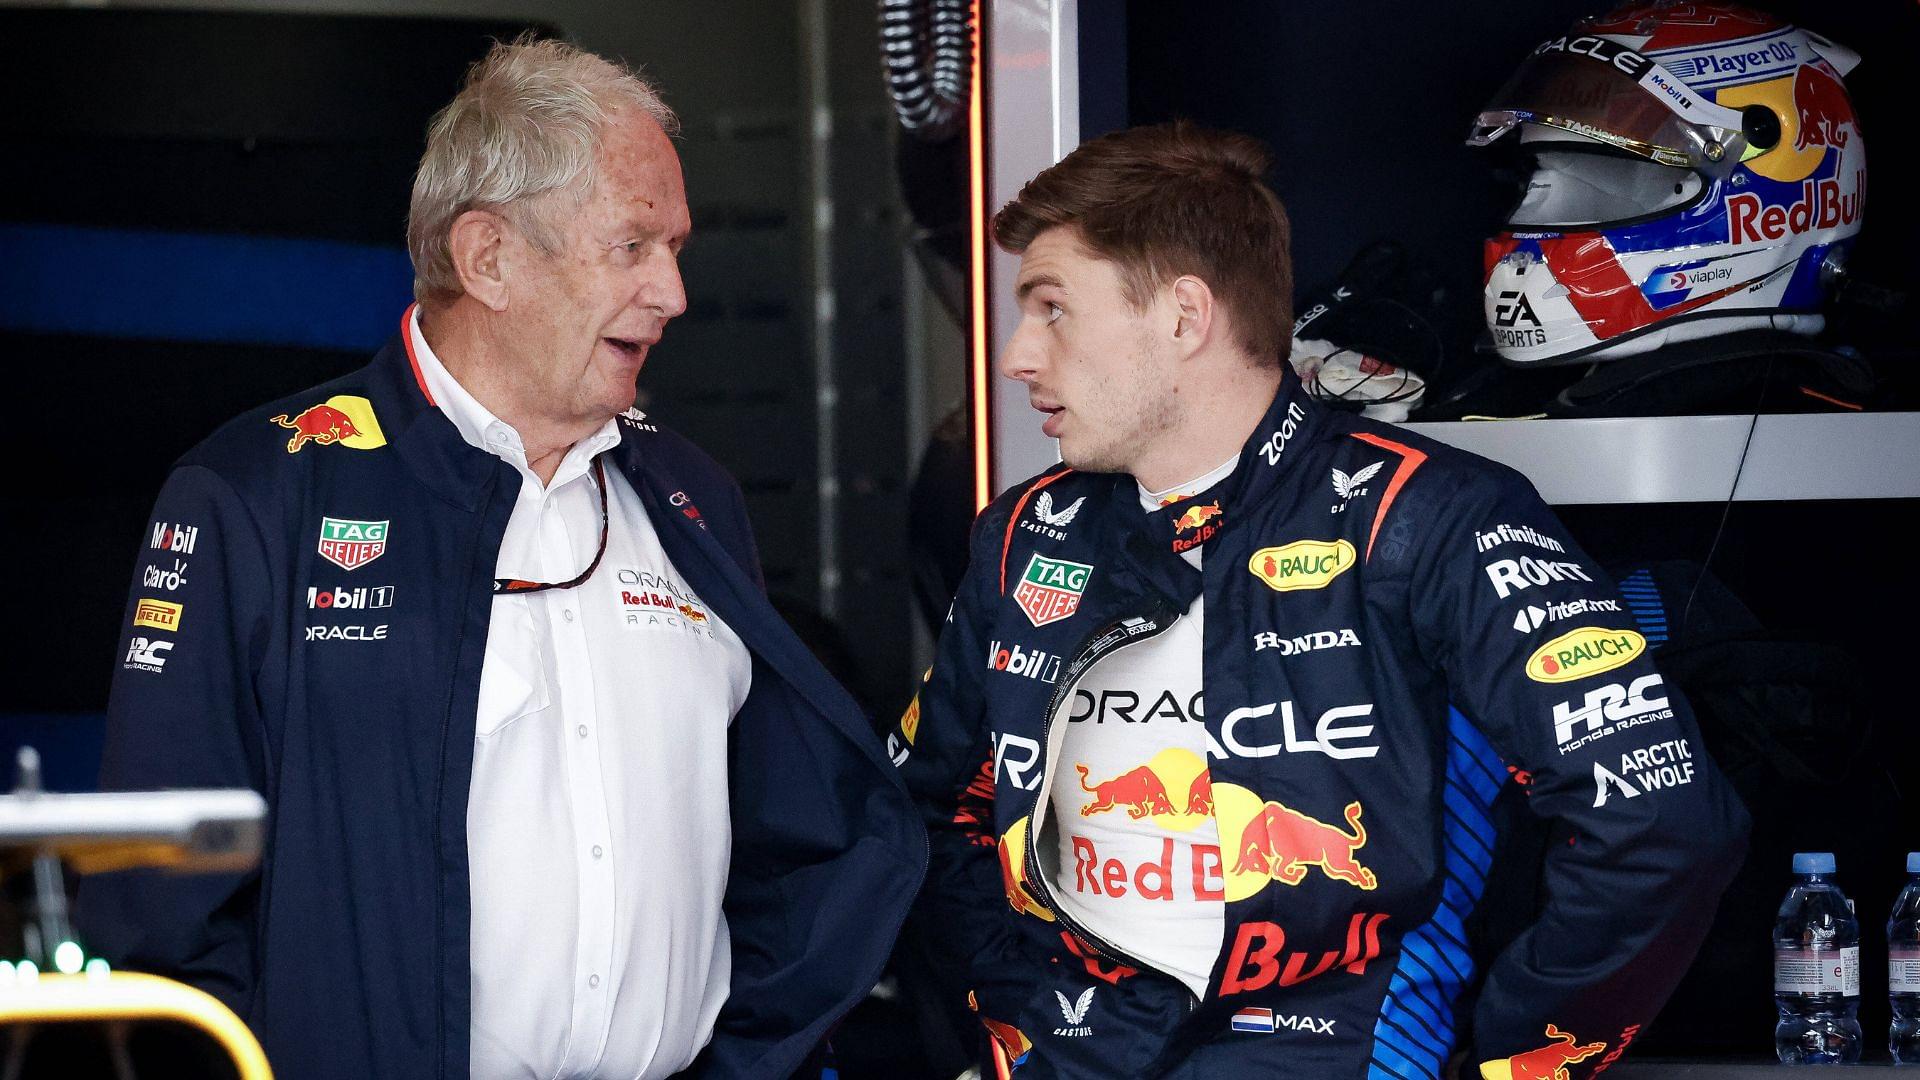 “You Concentrate on F1”: Helmut Marko Jabs Max Verstappen After Austria’s Euro Win Over Netherlands